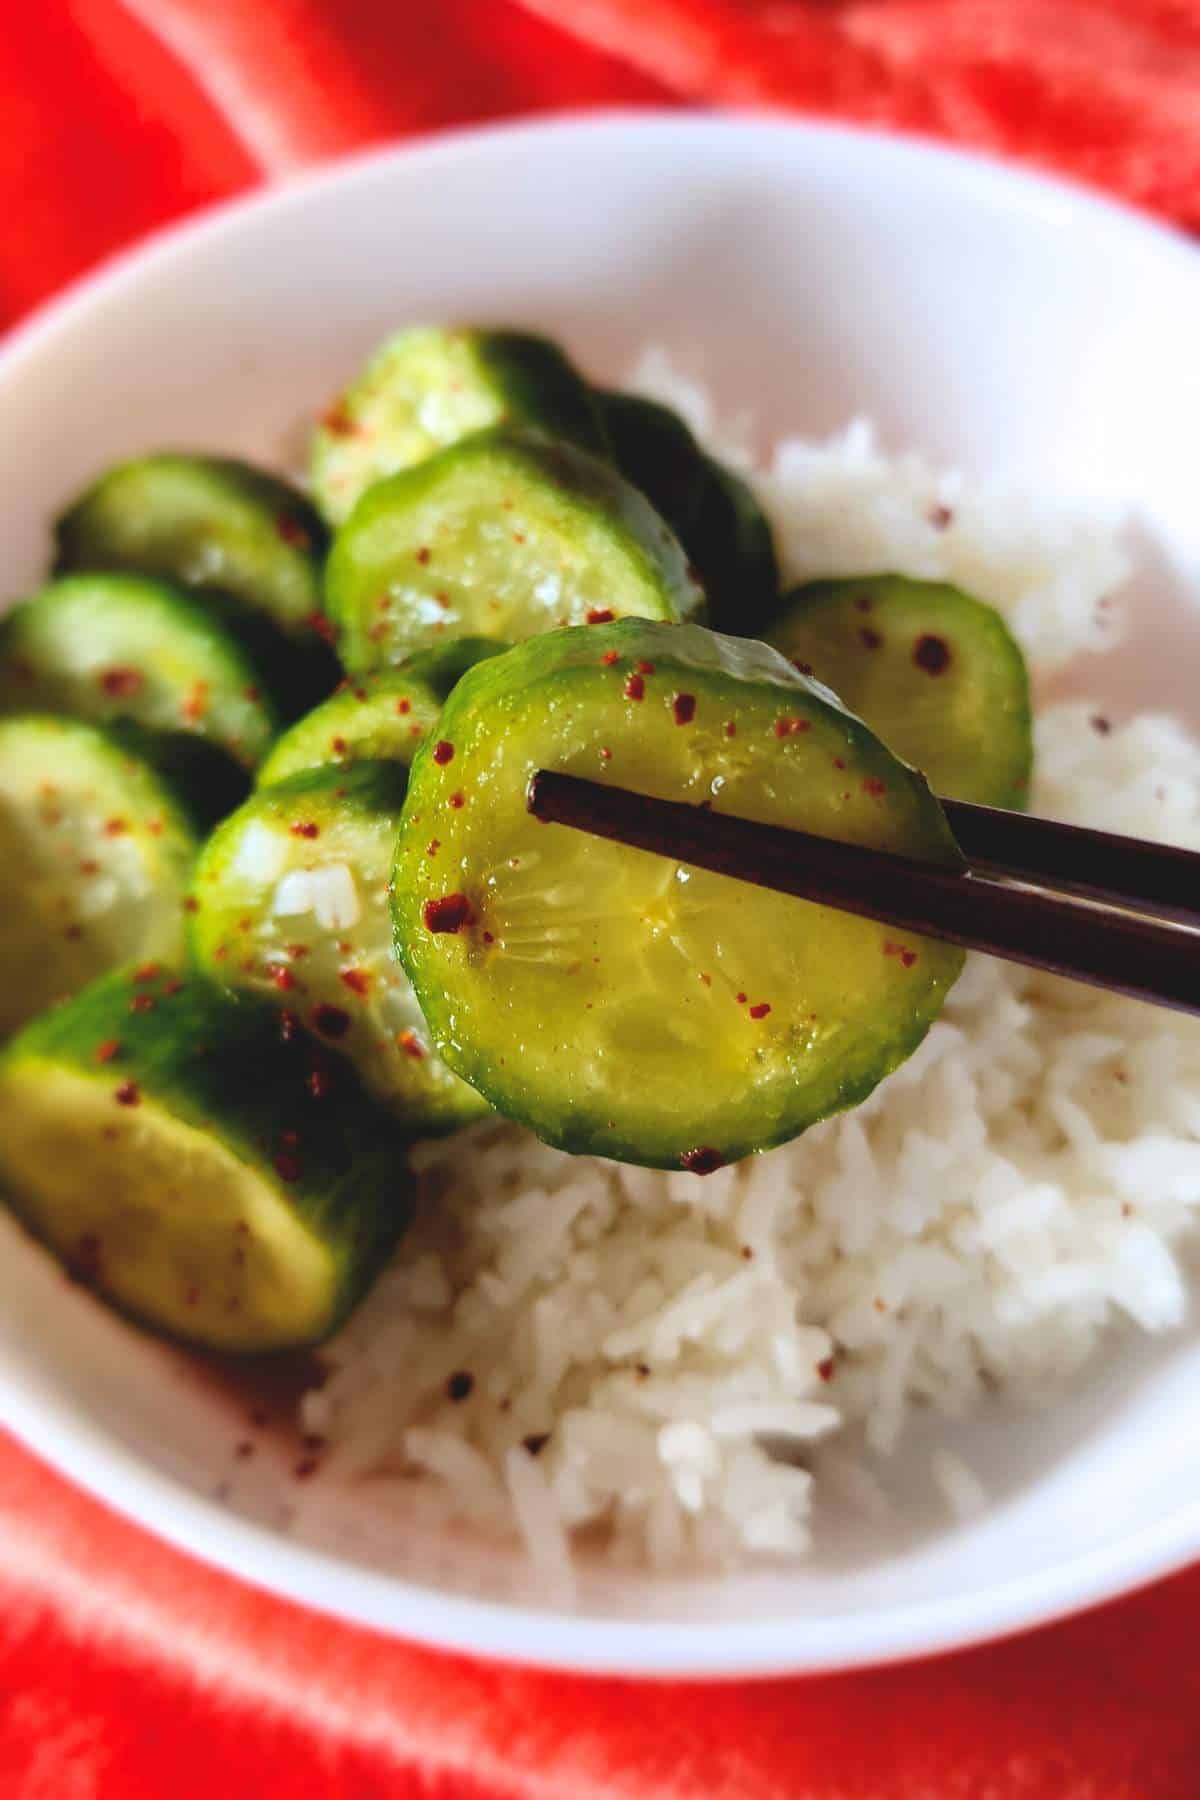 chopsticks holding a cucumber coin with bowl in background.